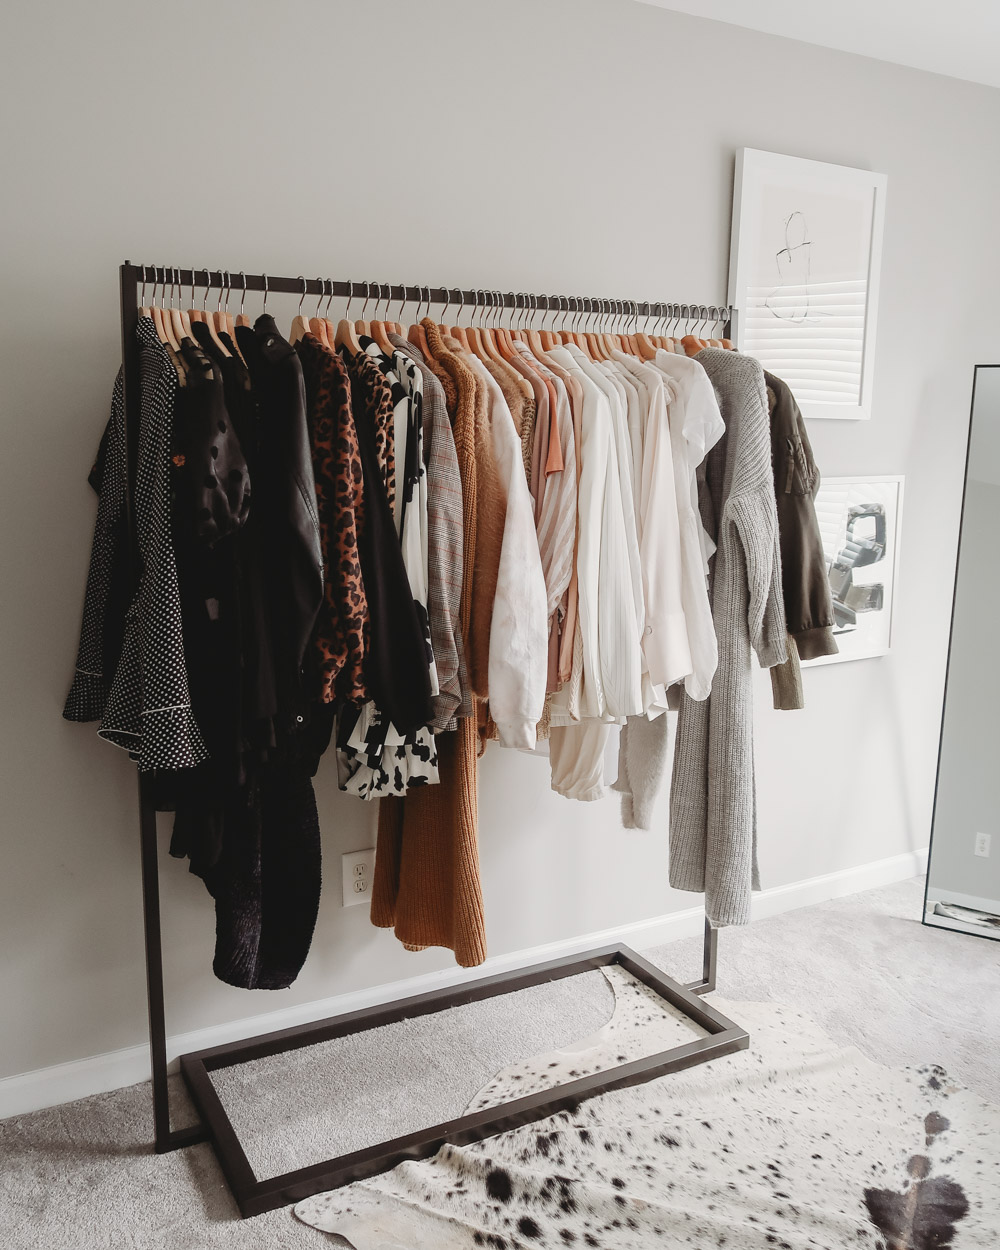 A modern and organized clothing rack sitting against a wall.